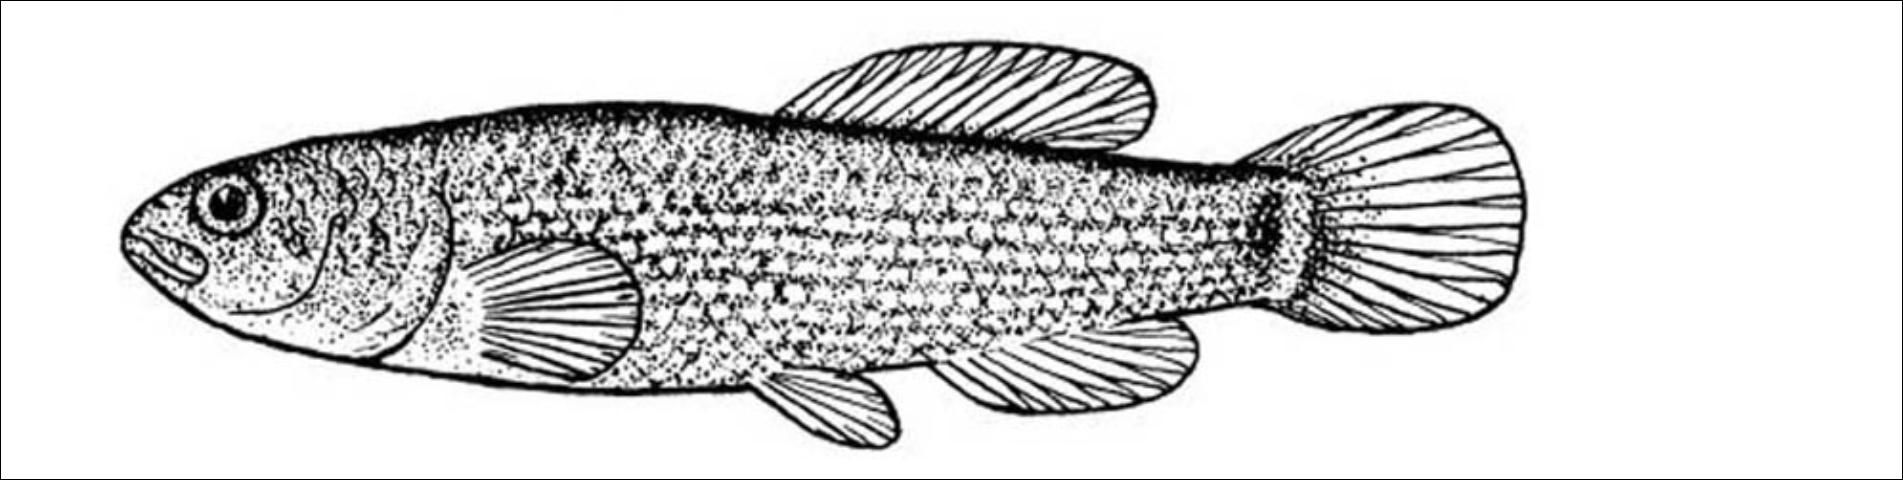 Figure 1. Eastern Mudminnow (Umbra pygmaea) to 3 inches. Dark vertical bar at base of tail. Non-game fish.